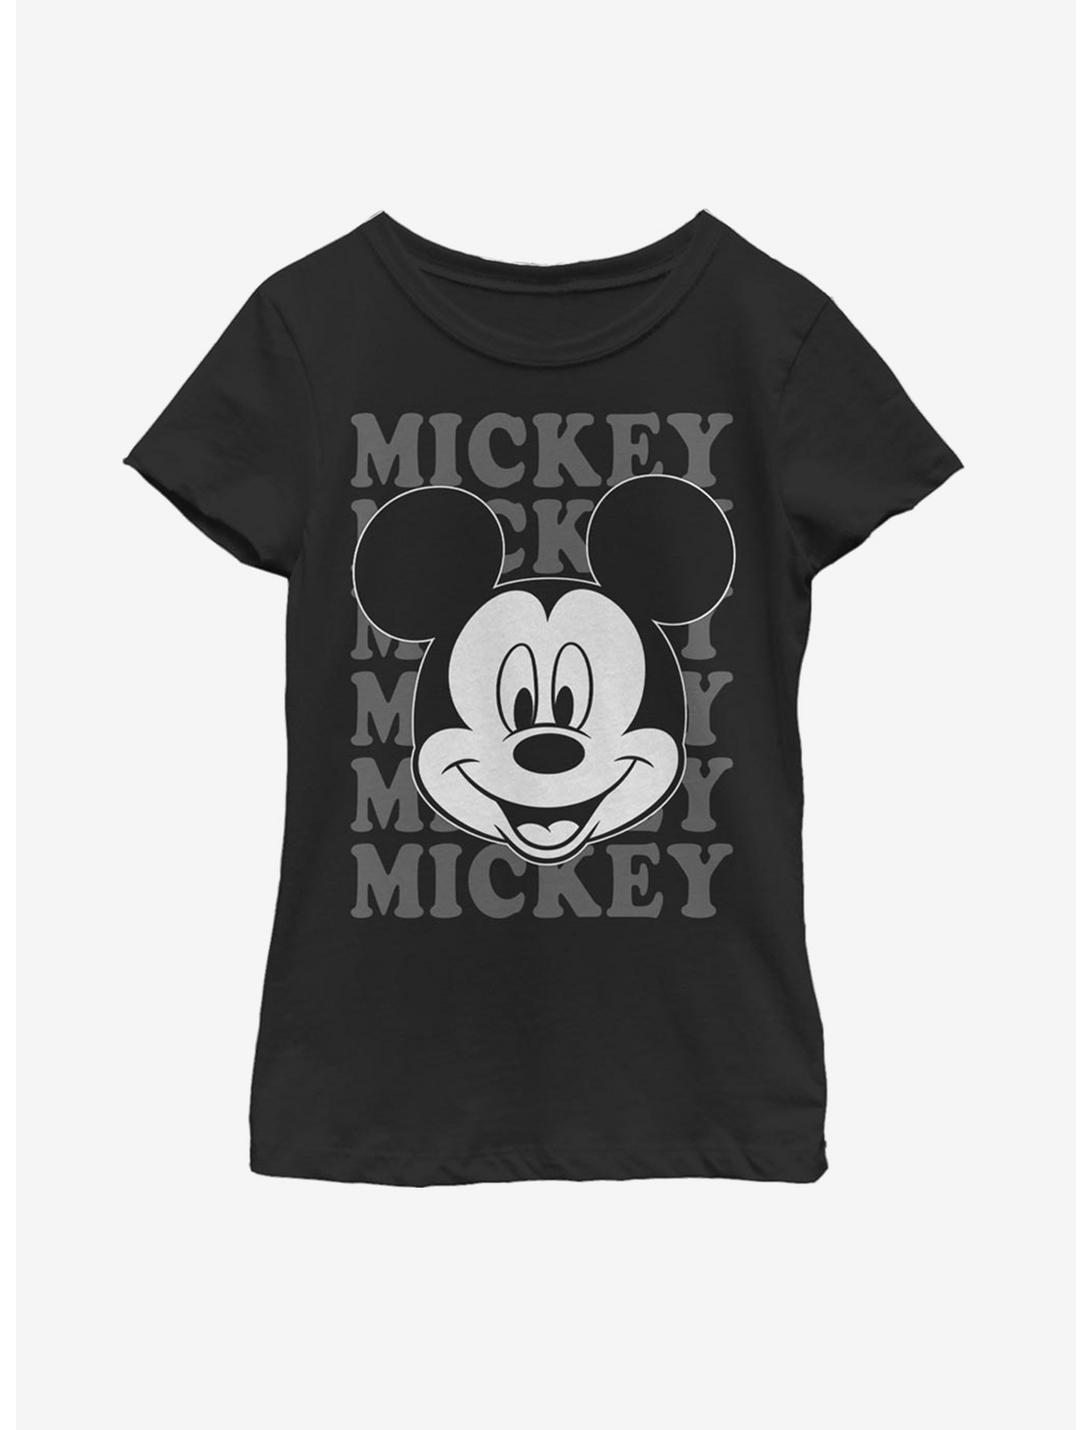 Disney Mickey Mouse All Name Youth Girls T-Shirt, BLACK, hi-res